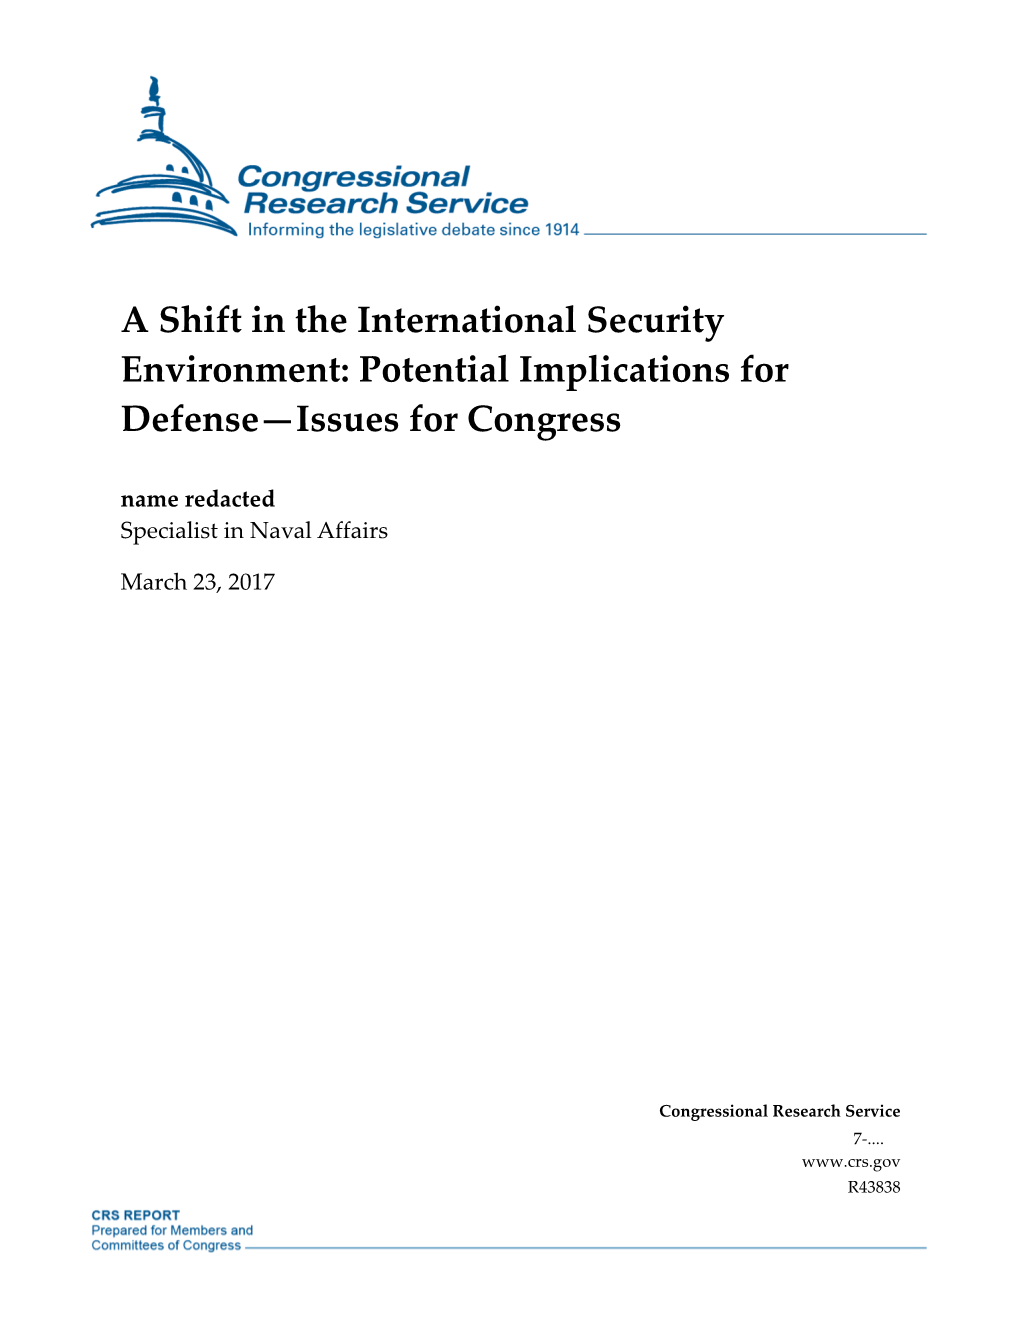 A Shift in the International Security Environment: Potential Implications for Defense—Issues for Congress Name Redacted Specialist in Naval Affairs